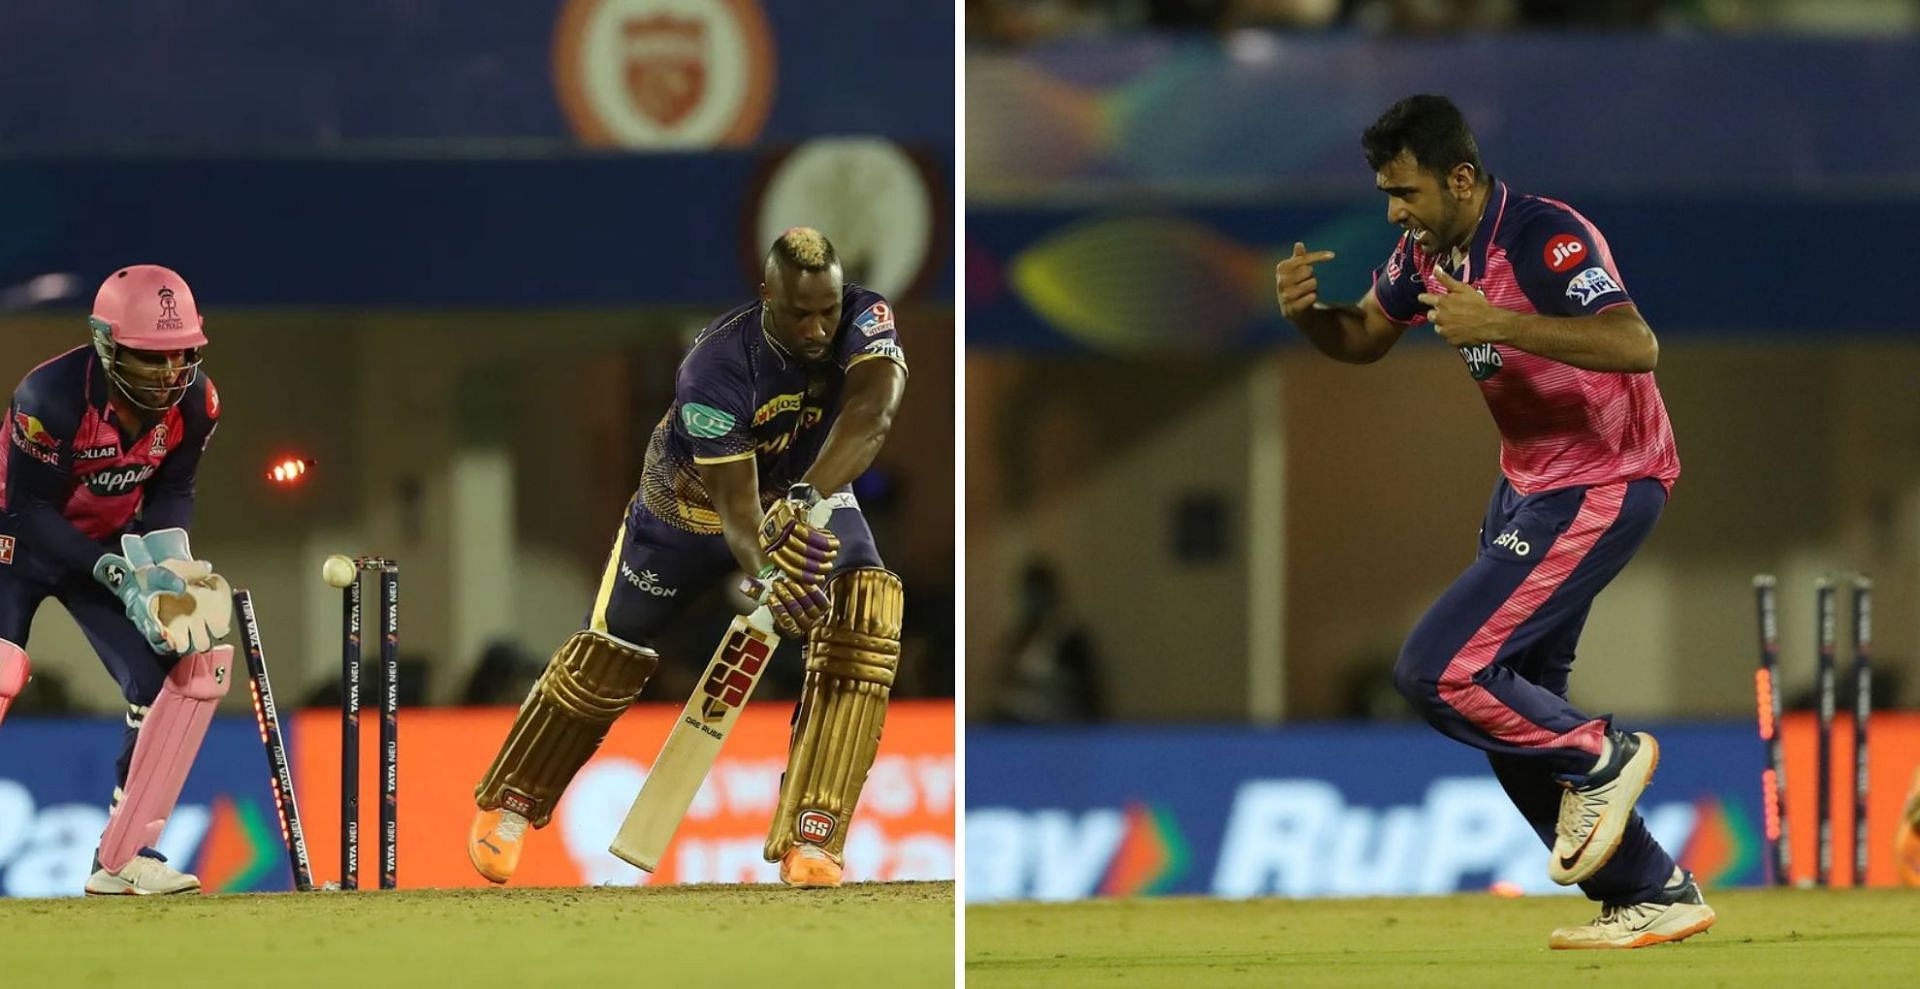 Ravichandran Ashwin cleans Andre Russell with a brilliant carrom ball (Credit: BCCI/IPL)